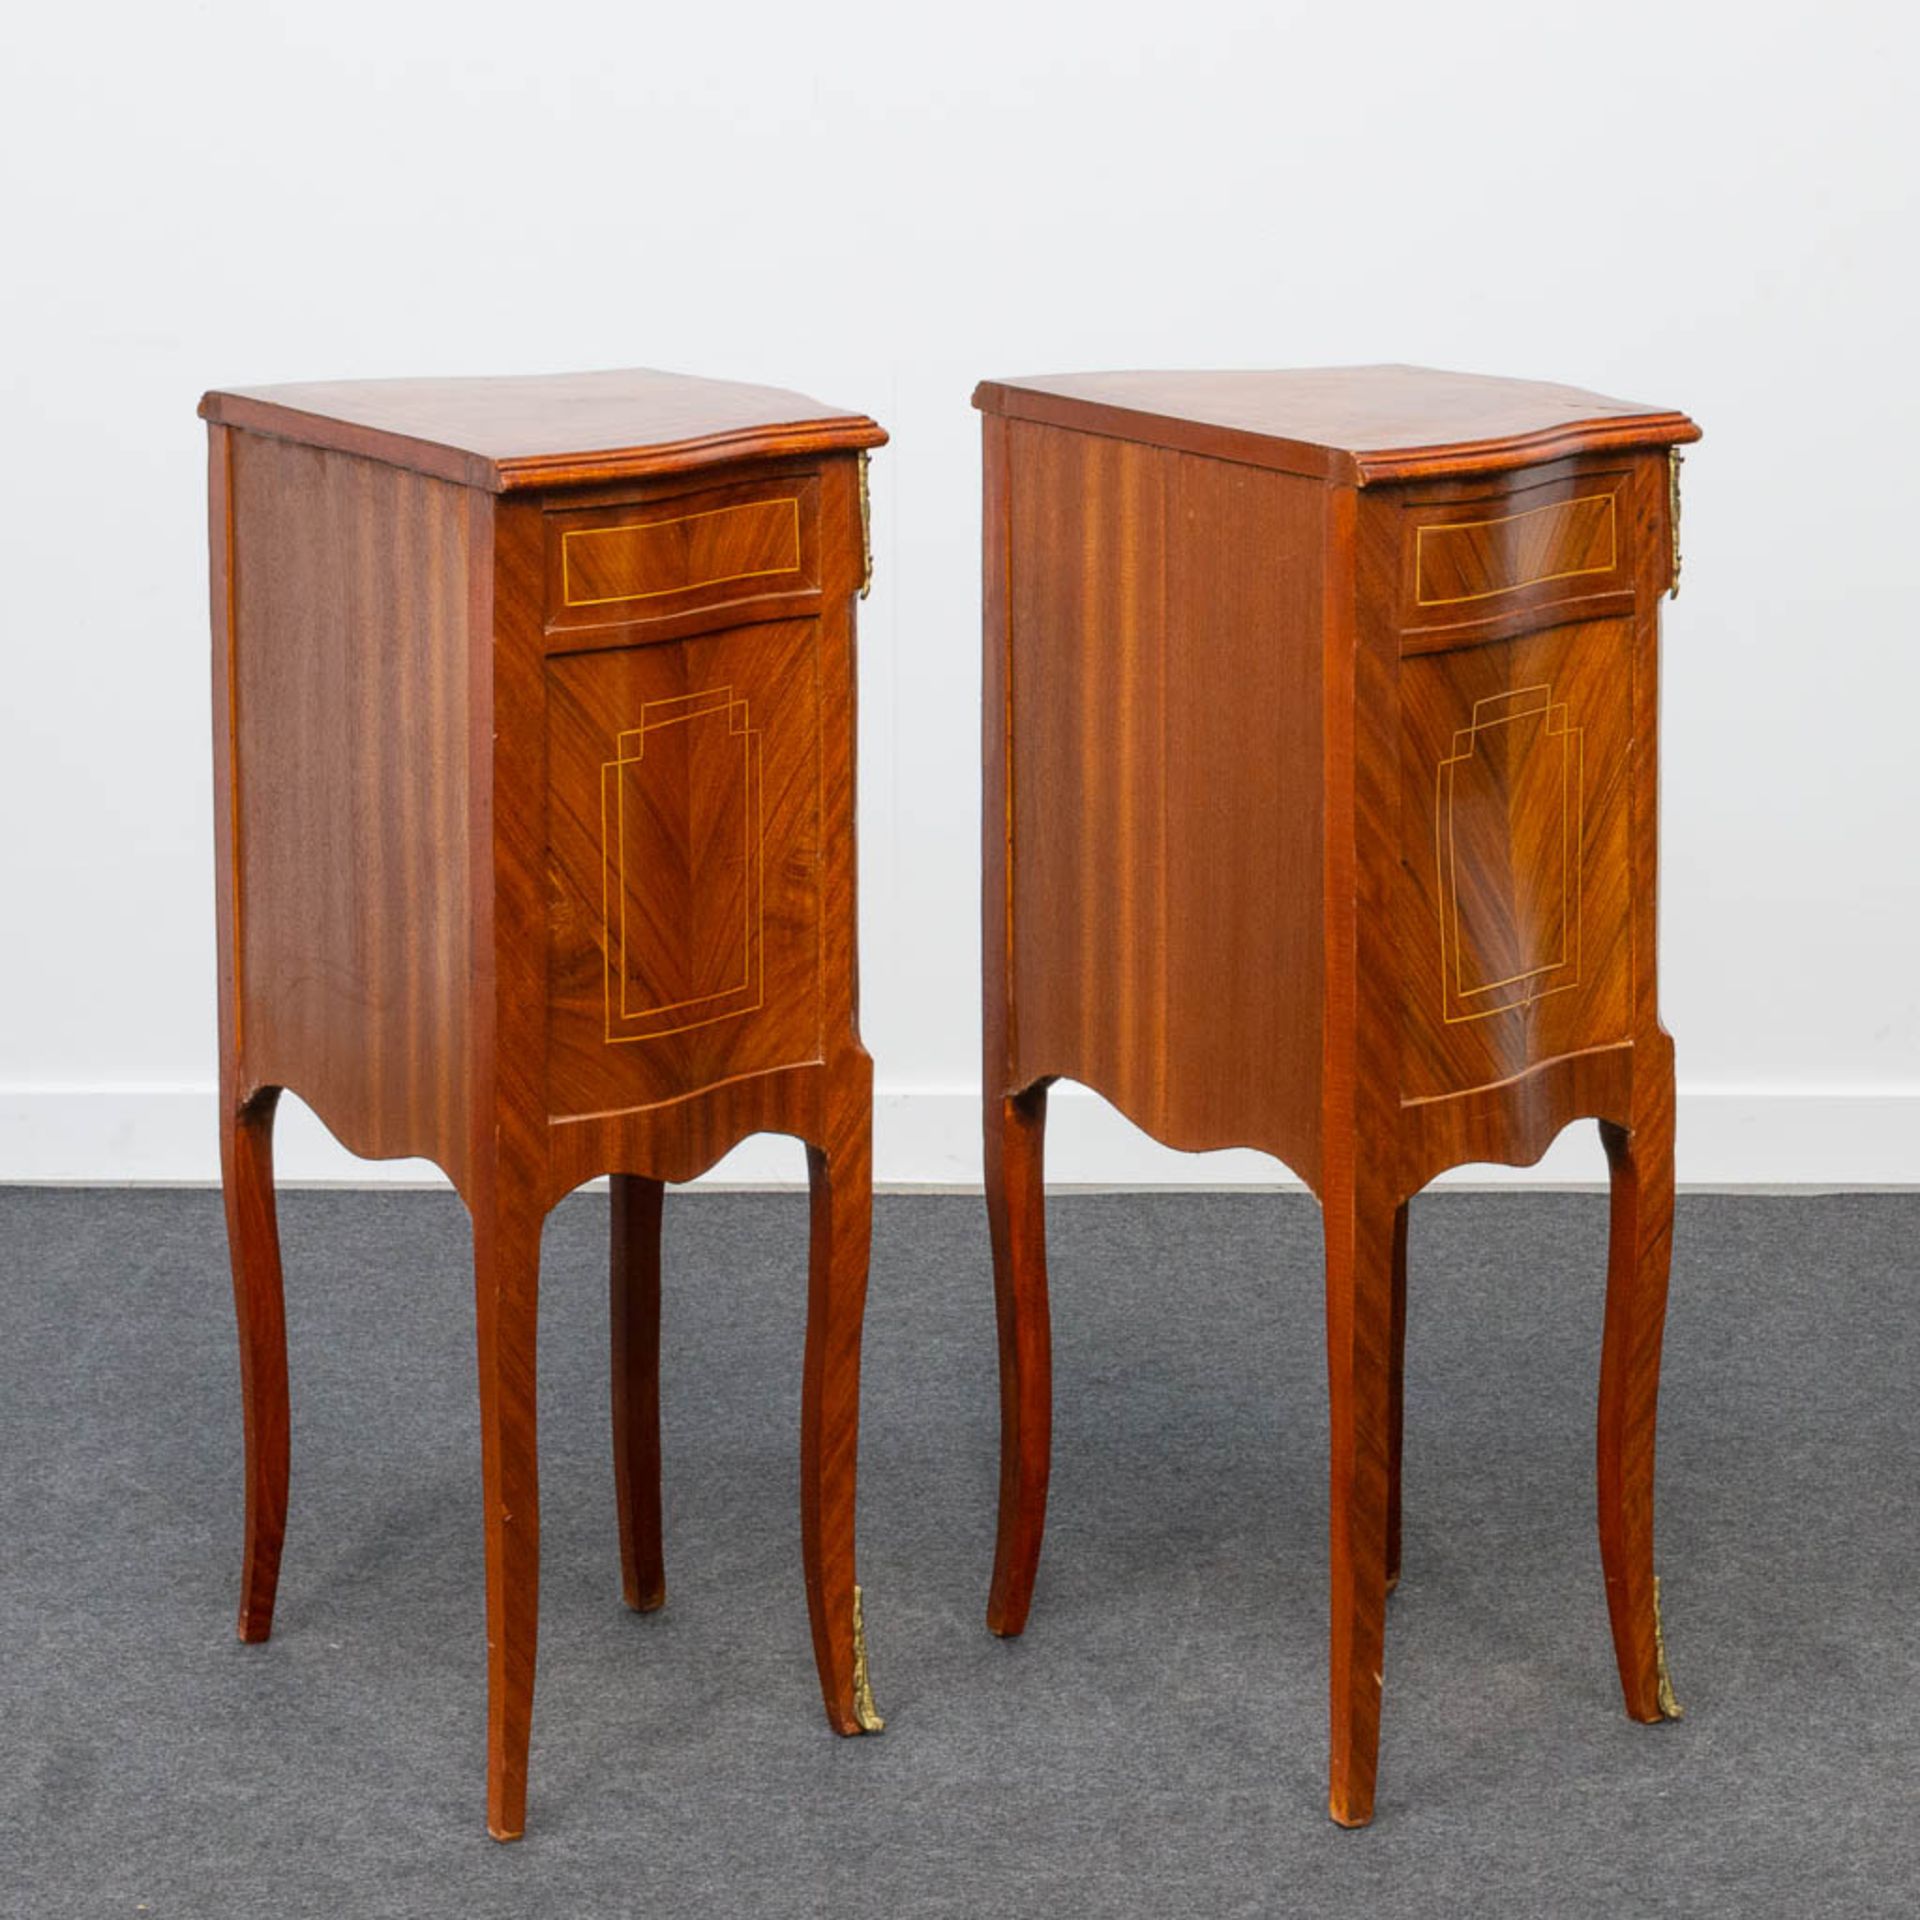 A pair of bronze mounted nightstands, inlaid with marquetry. Second half of the 20th century. - Image 9 of 22